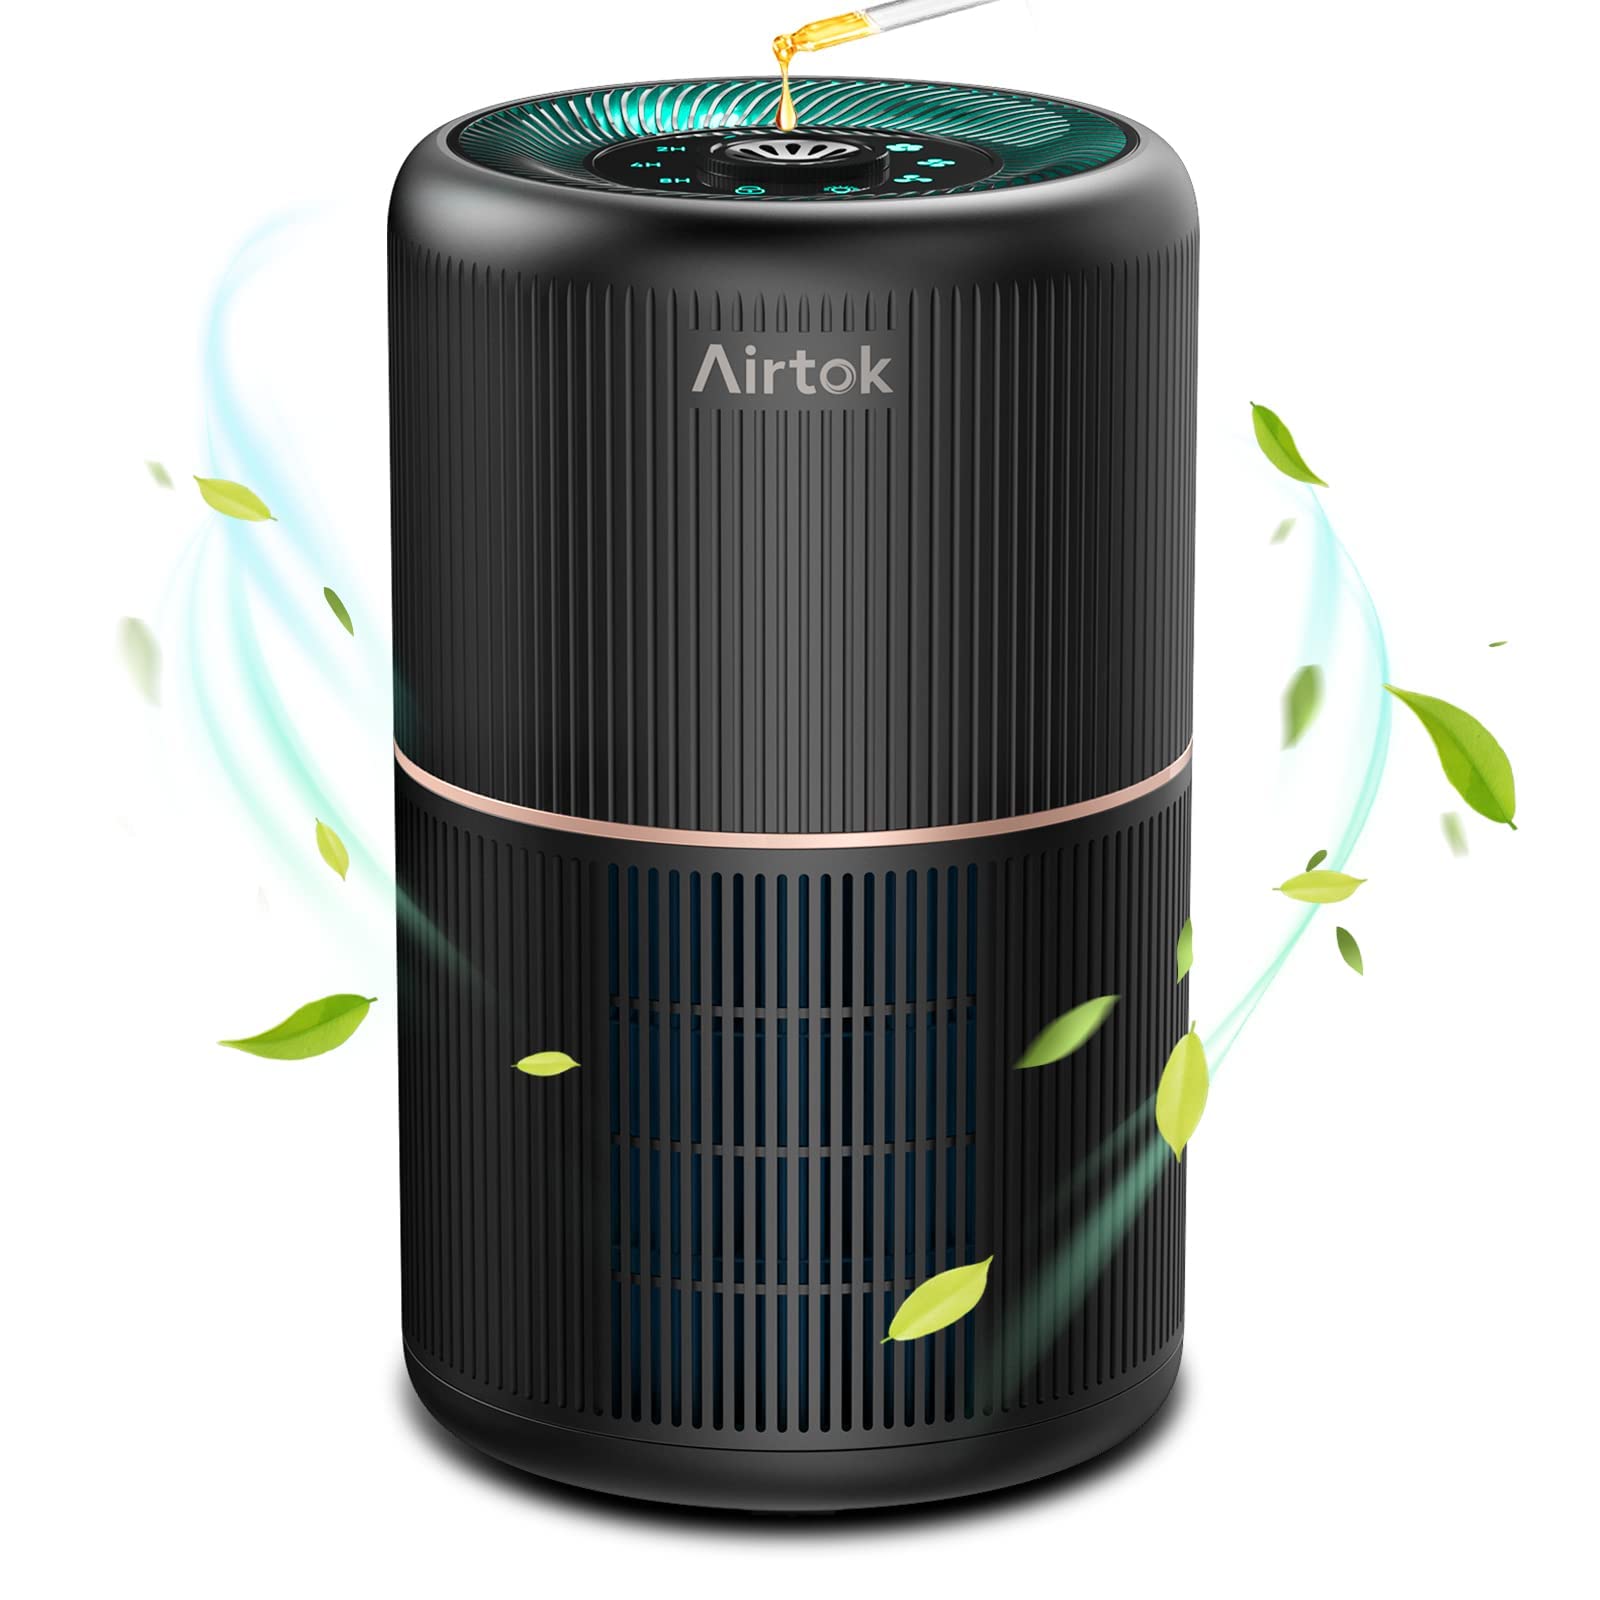 AIRTOK HEPA Air Purifier for Home Bedroom with Fragrance Sponges